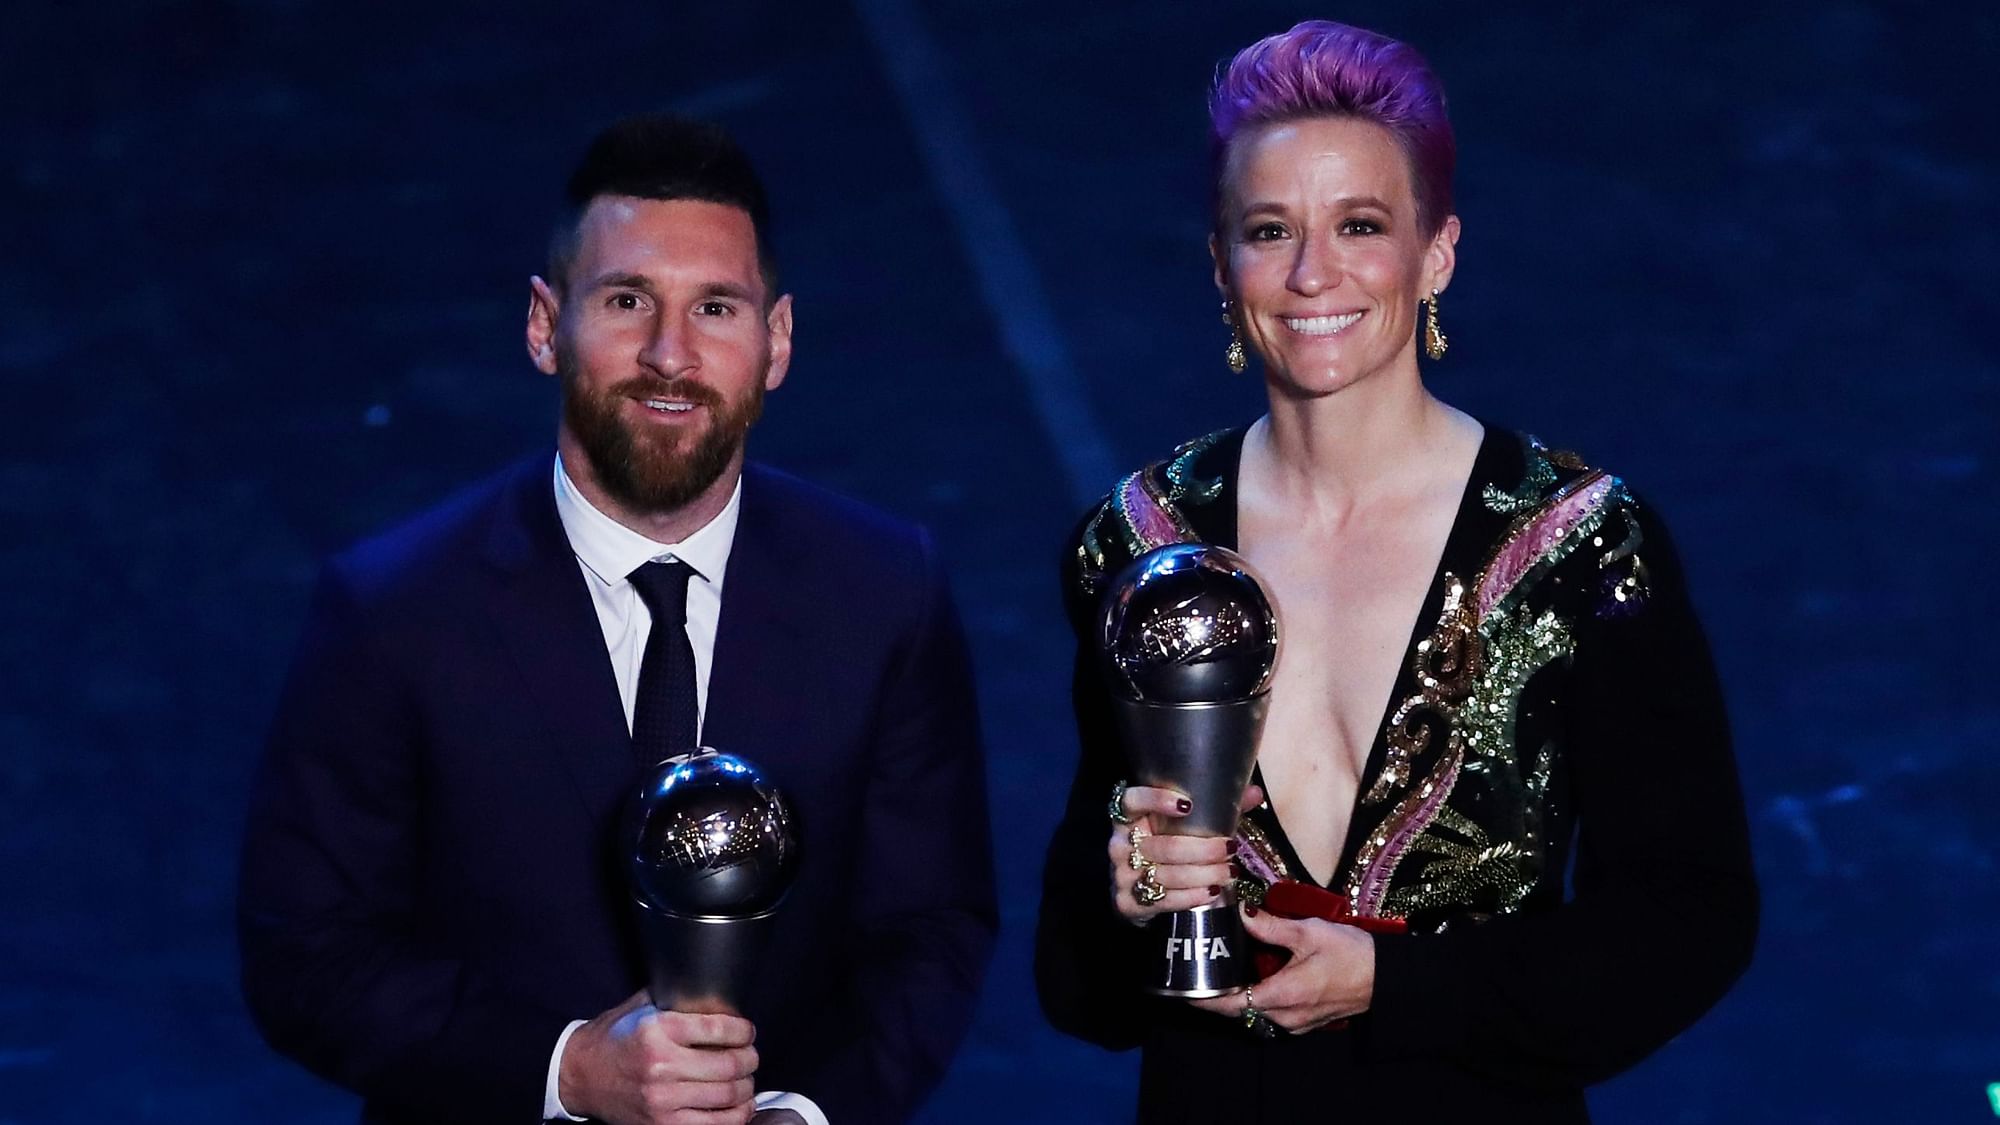 Best FIFA Football Awards 2019: Megan Rapinoe (right) and Lionel Messi with Player of the Year awards in Milan on Monday.